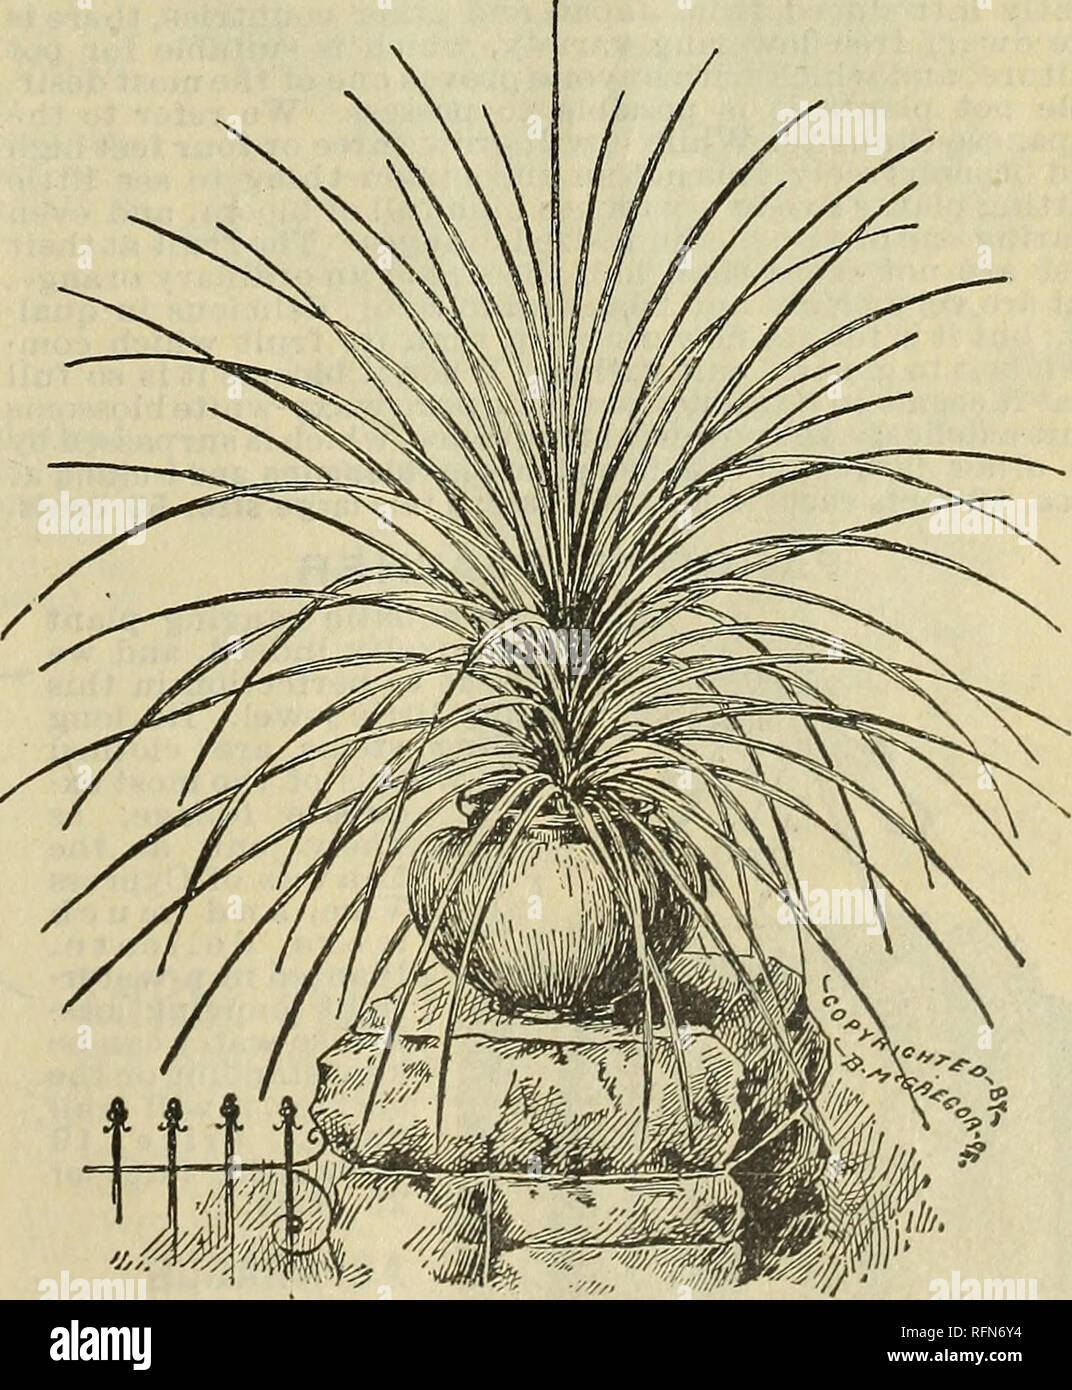 . Floral gems for winter flowering. Flowers Seeds Catalogs; Bulbs (Plants) Catalogs; Plants, Ornamental Catalogs; Commercial catalogs Ohio Springfield. Grevlllea, the Australian Silk Tree. Umbrella Plant. (Cyperus Alternifolius.} UMBRELLA PLANT. (Cyperus Alternifolius.) An ornamental grass, throwing up stems about two feet high, surmounted at the top with a whorl of leaves, diverg- ing horizontally, giving it a very curious appearance. Splen- did for the center of vasos or as a water plant. Price, 10 cents each; large, handsome plants, 20 cents each.. Dracaena Indivisa. THE MAGNIFICENT DECORAT Stock Photo